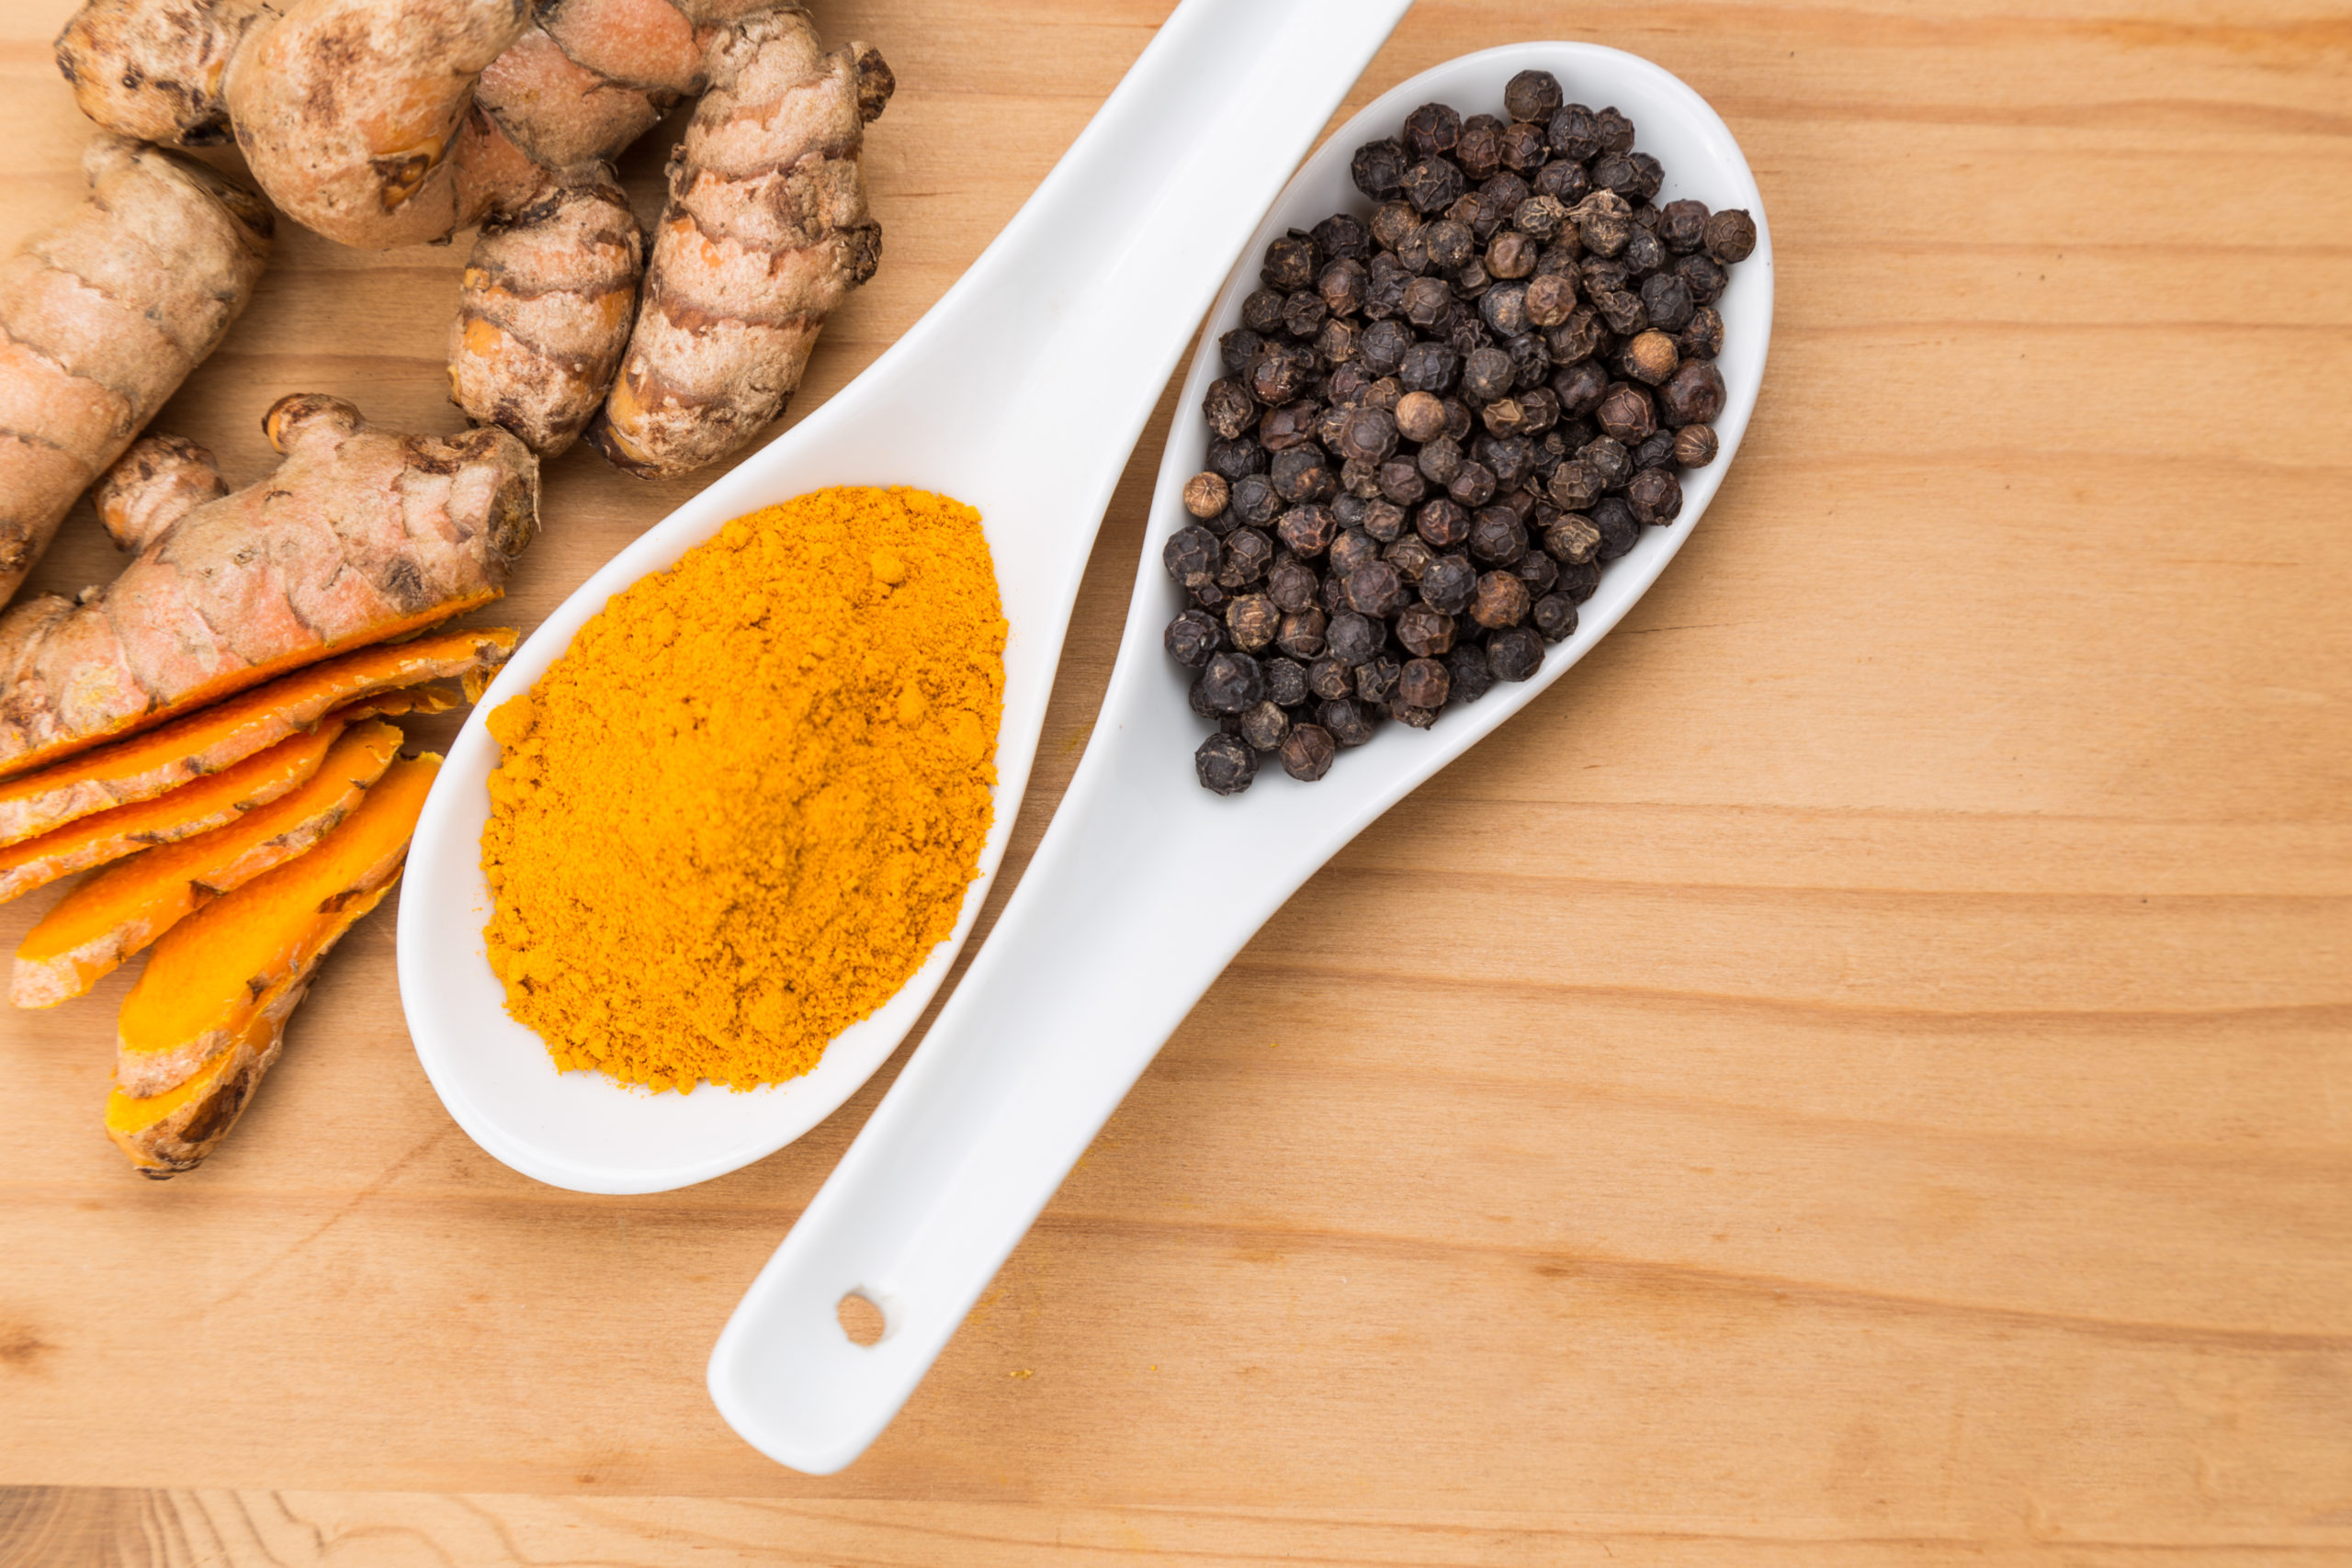 Clinical Trials May Further Prove Curcumin’s Cancer-Fighting Power